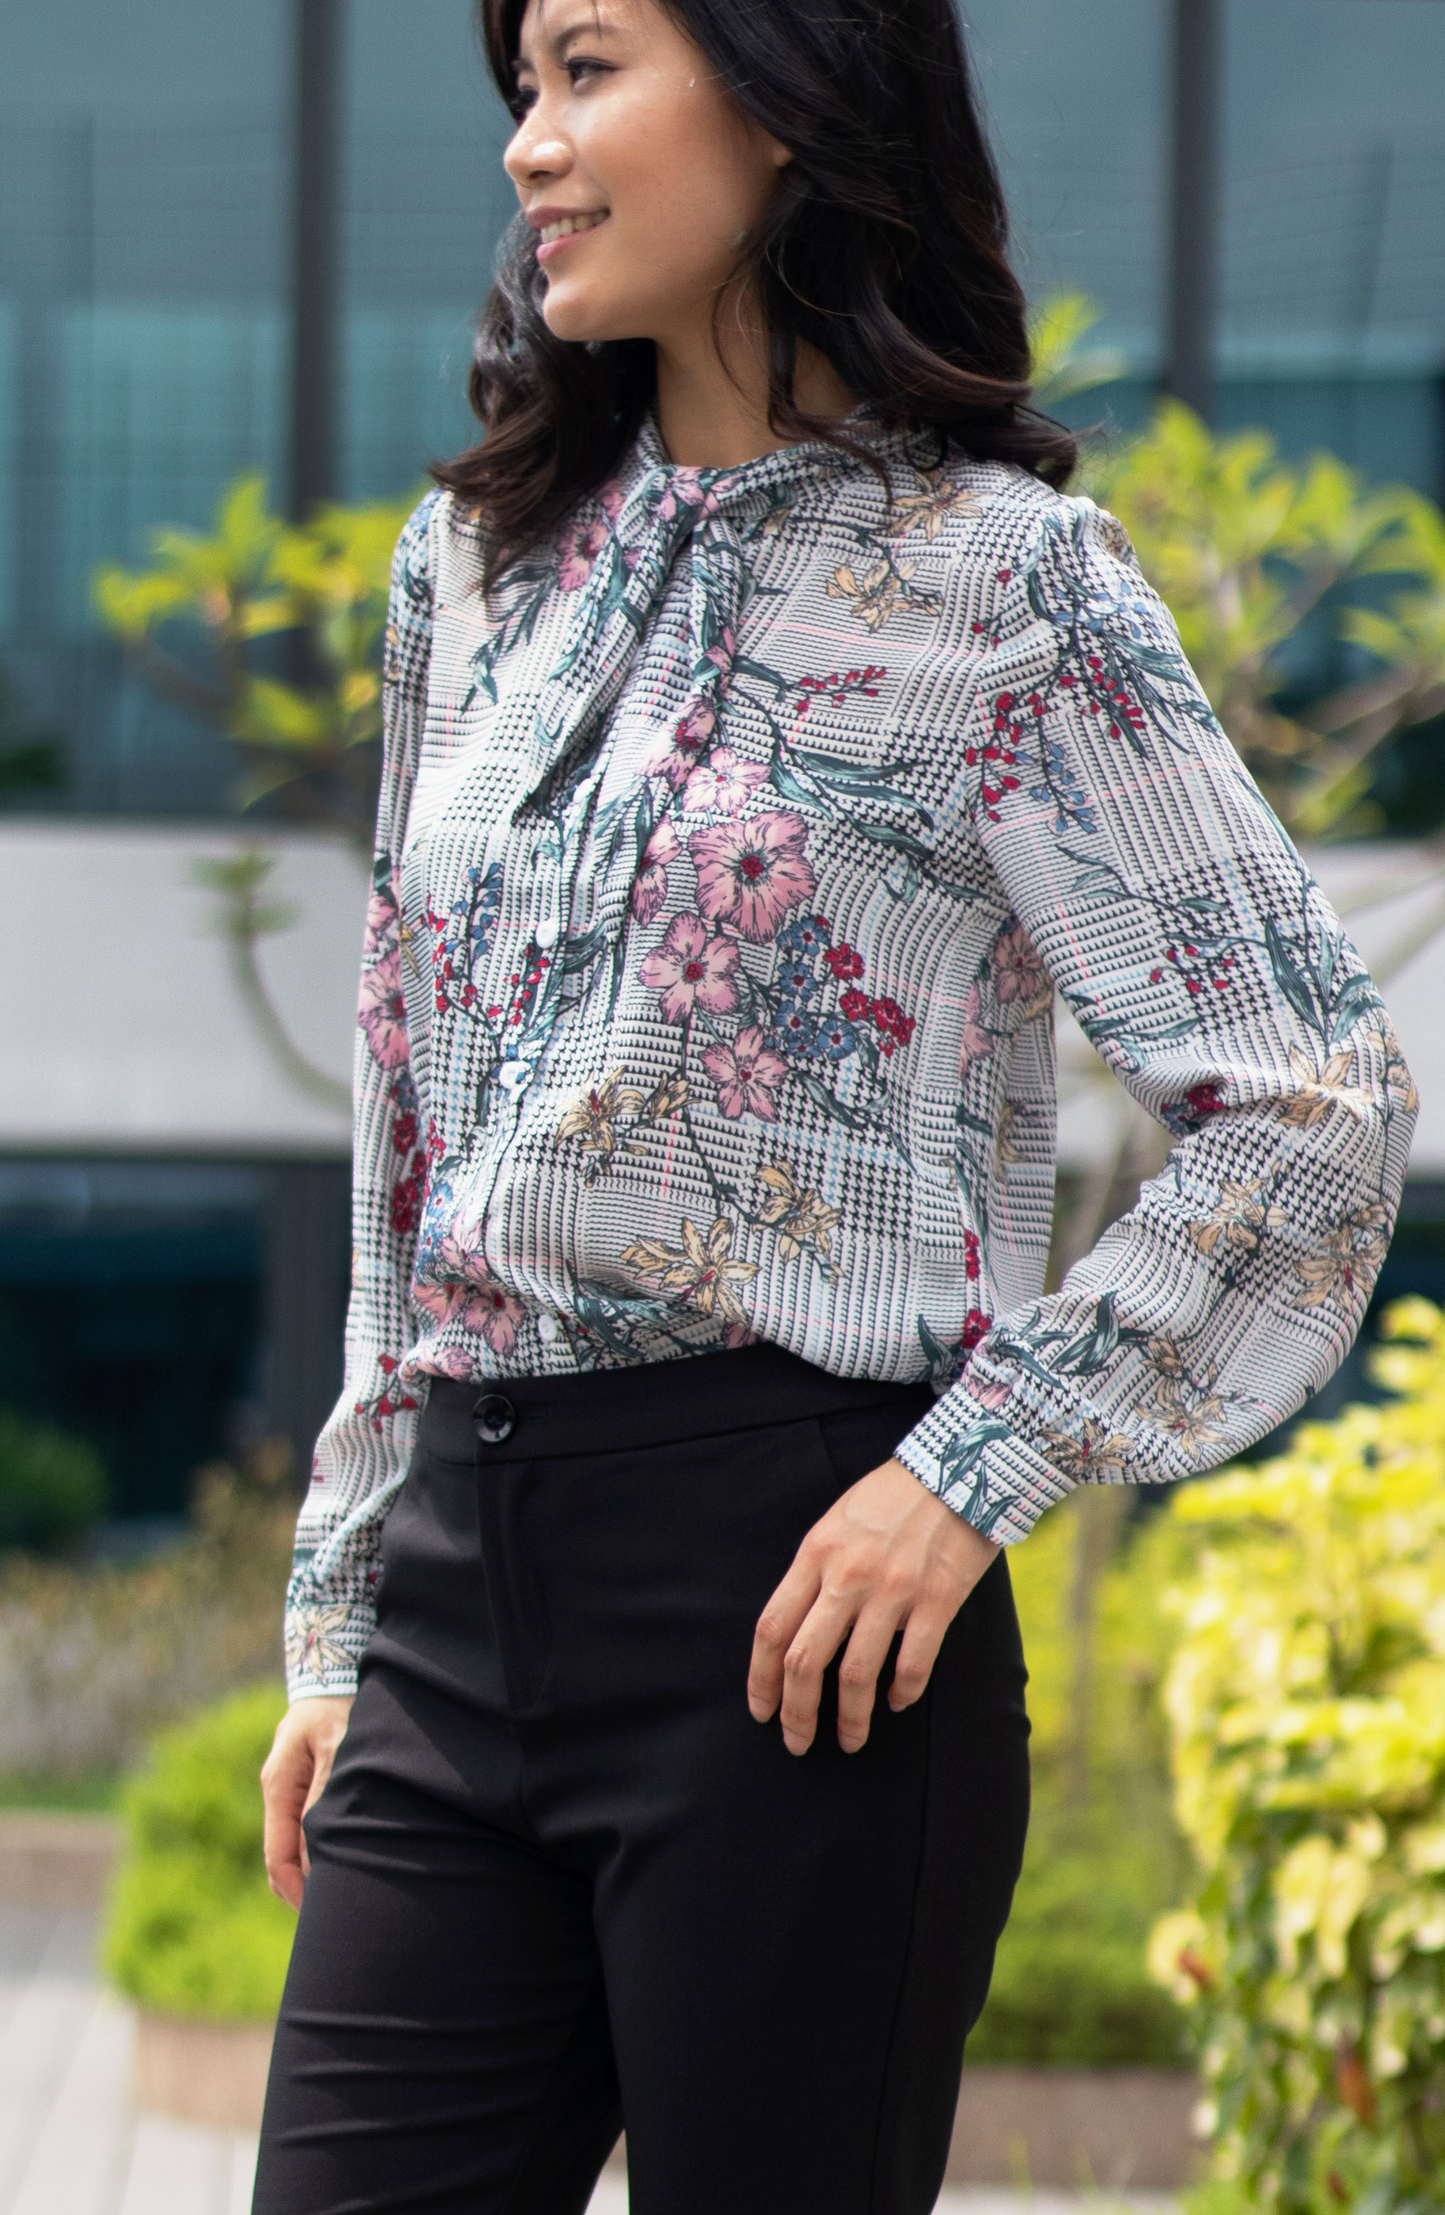 Soft Comfy Ditsy Floral Sketch Tie-Neck Cuffed Work Shirt Blouse